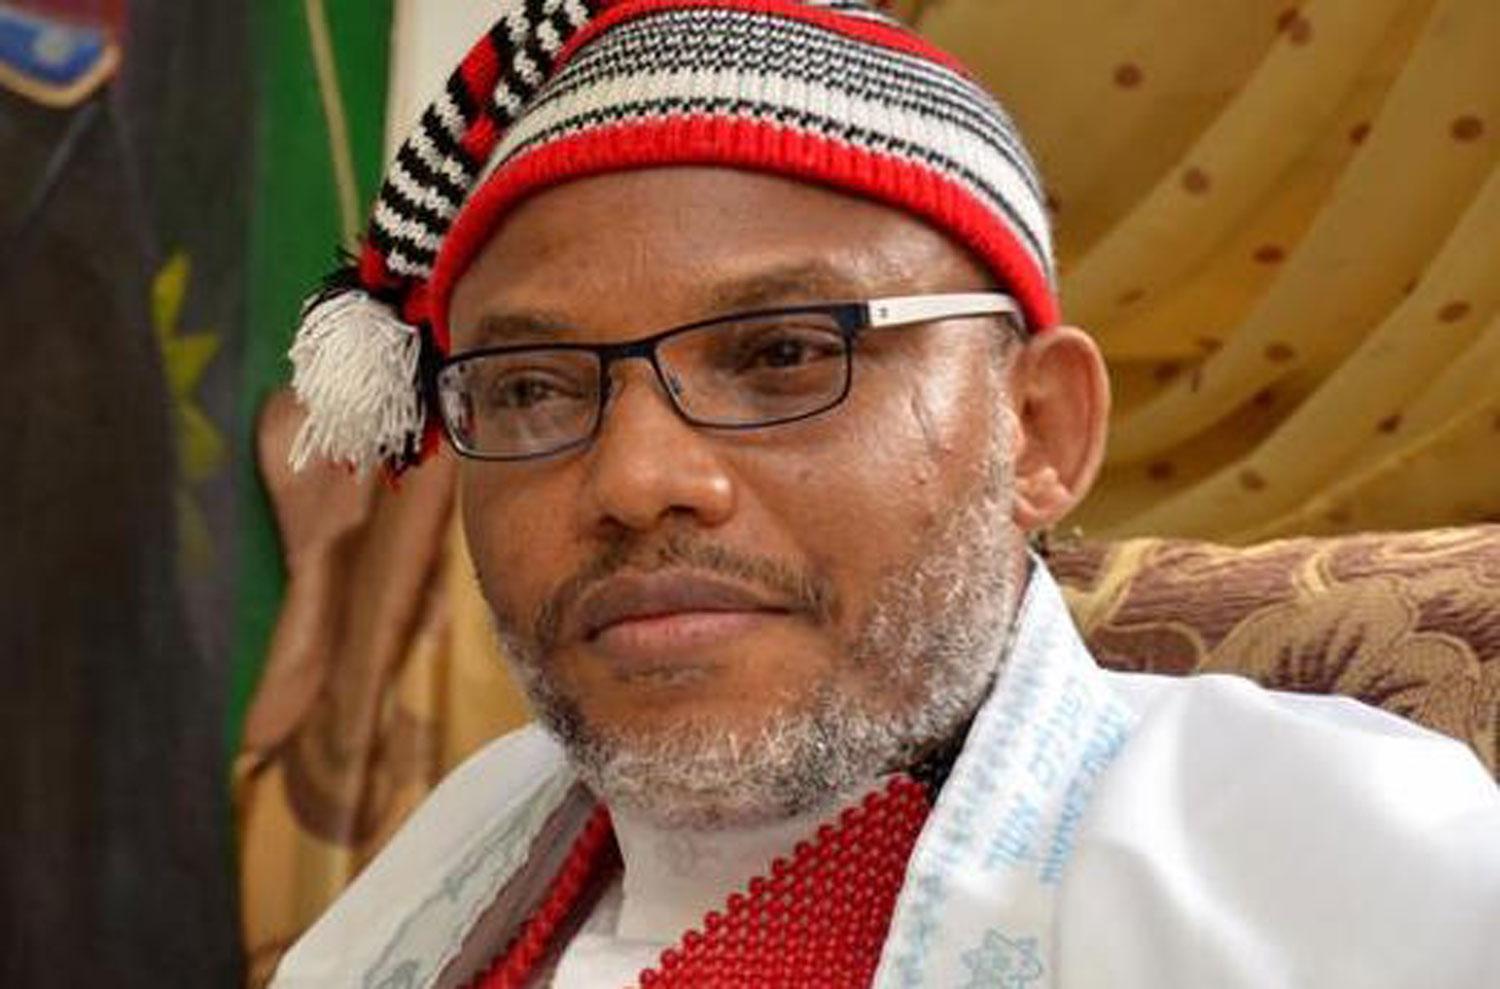 [GIST] Nnamdi Kanu’s Family Lawyers Move To Sue UK Foreign Secretary, Force Britain To Take Action Over IPOB Leader’s Alleged Torture, Rendition To Nigeria